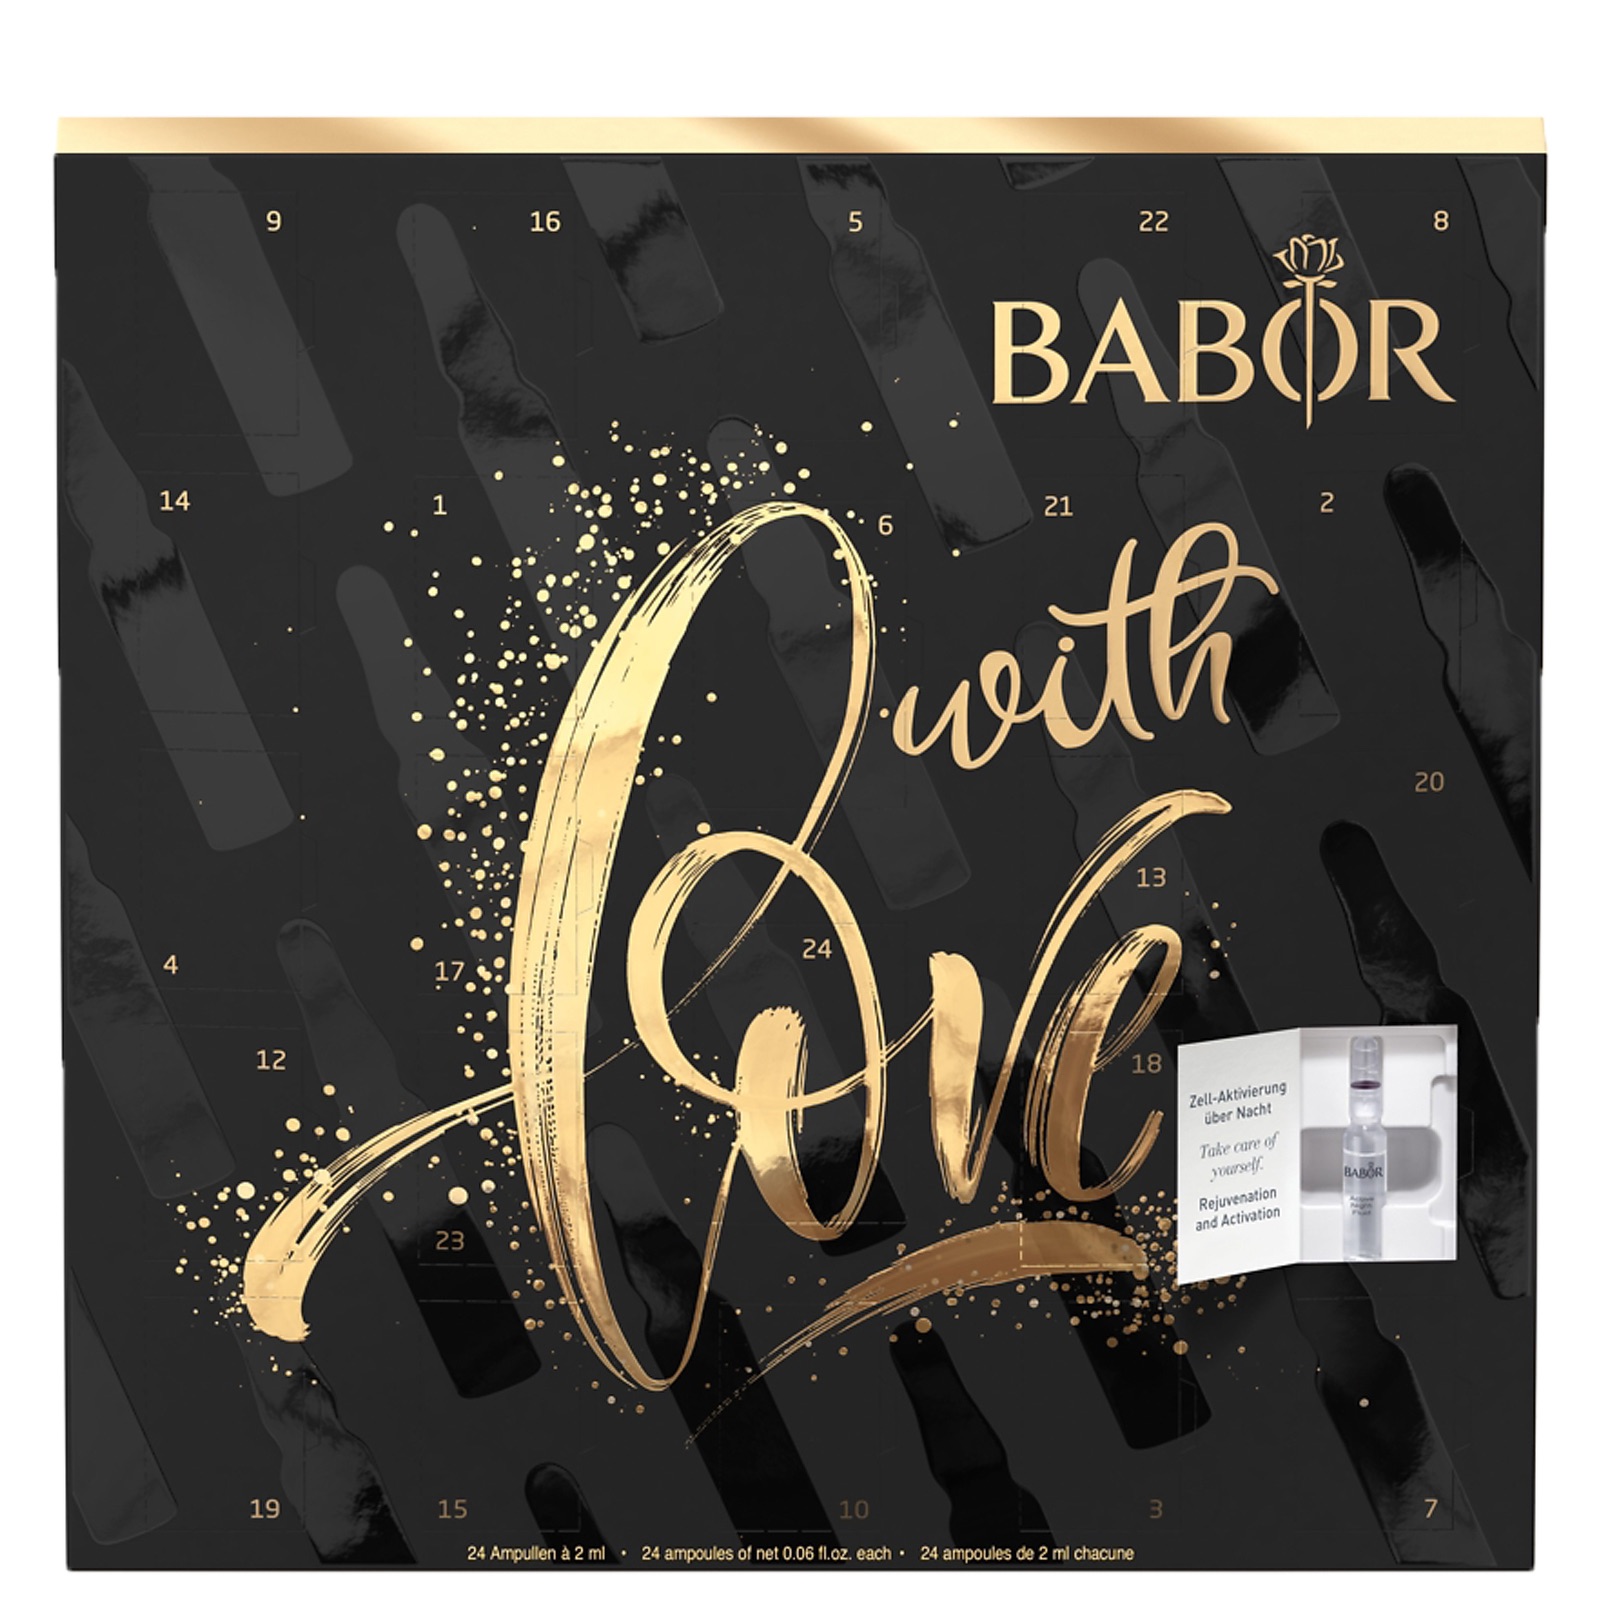 BABOR Christmas 2020 Ampoules Concentrate Advent Calendar - Gifts & Sets babor安瓶精华圣诞礼盒